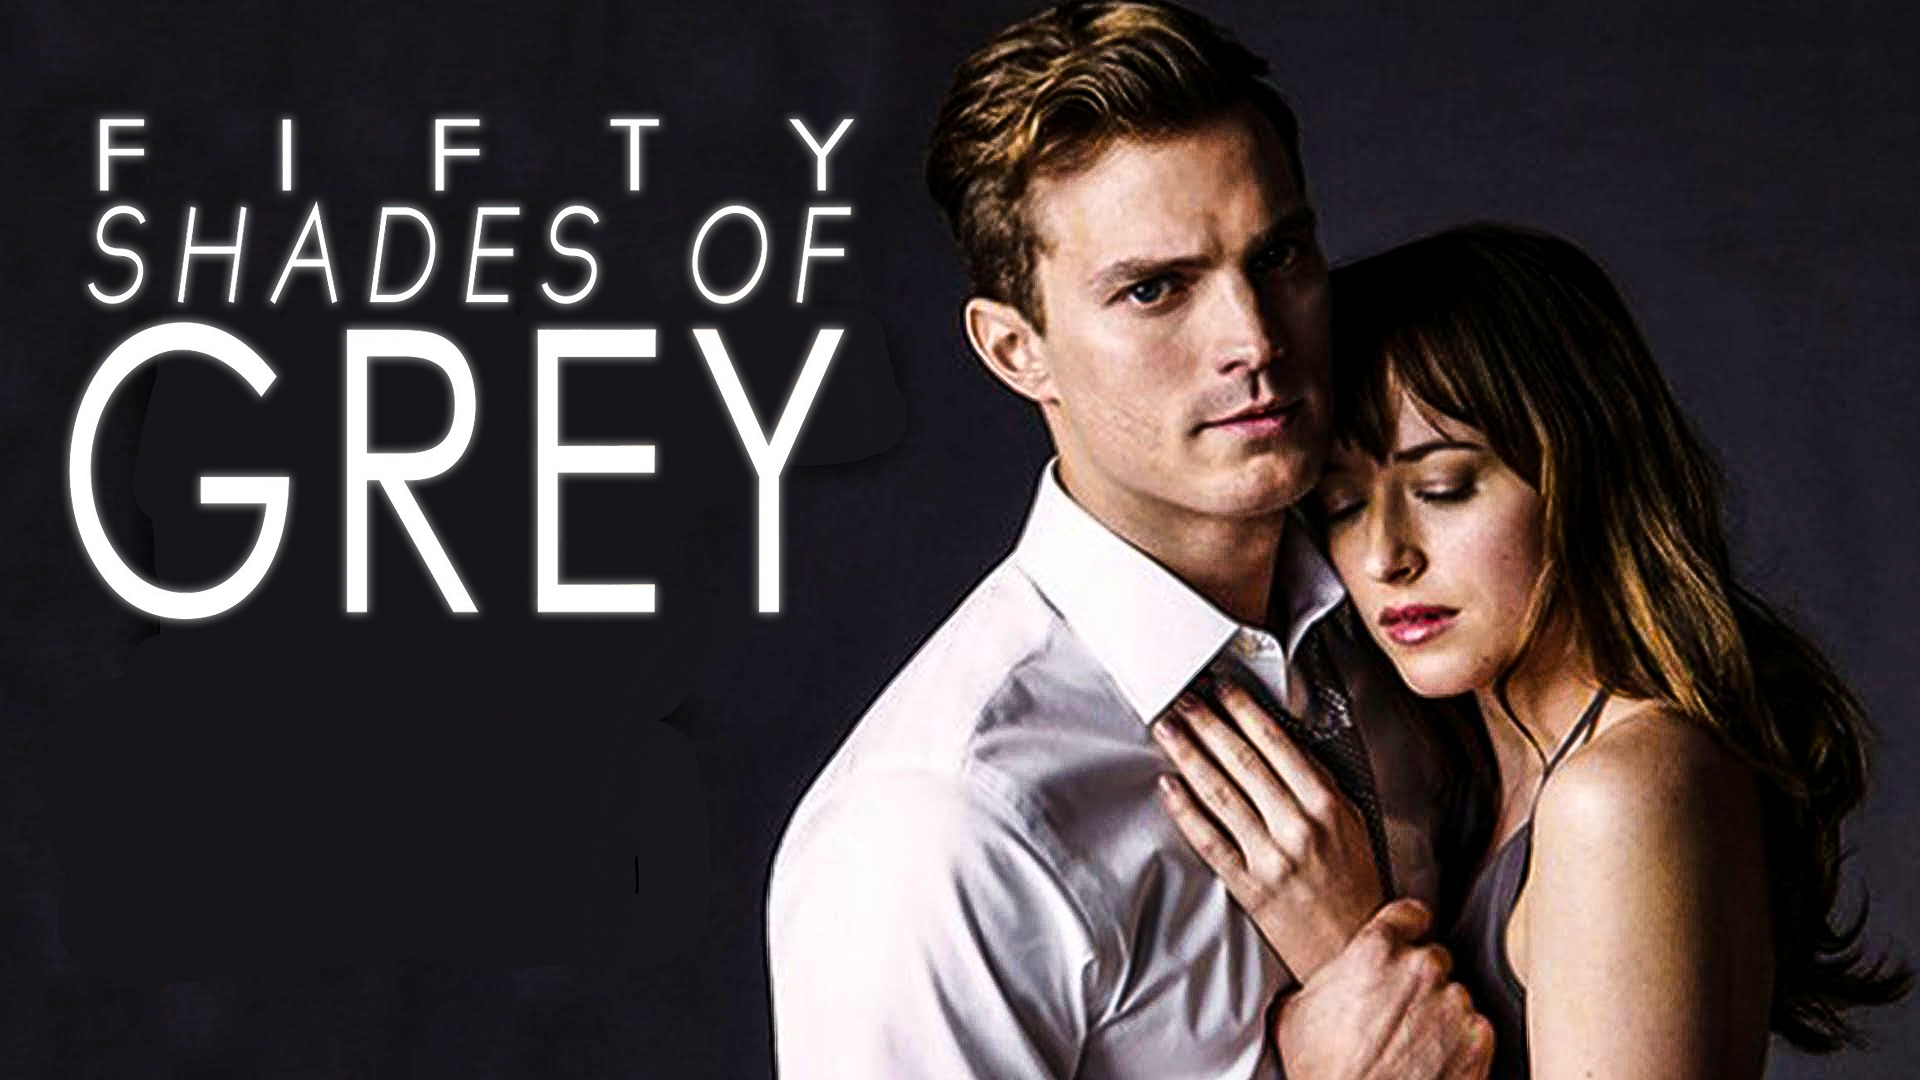 50 shades of grey free movies online